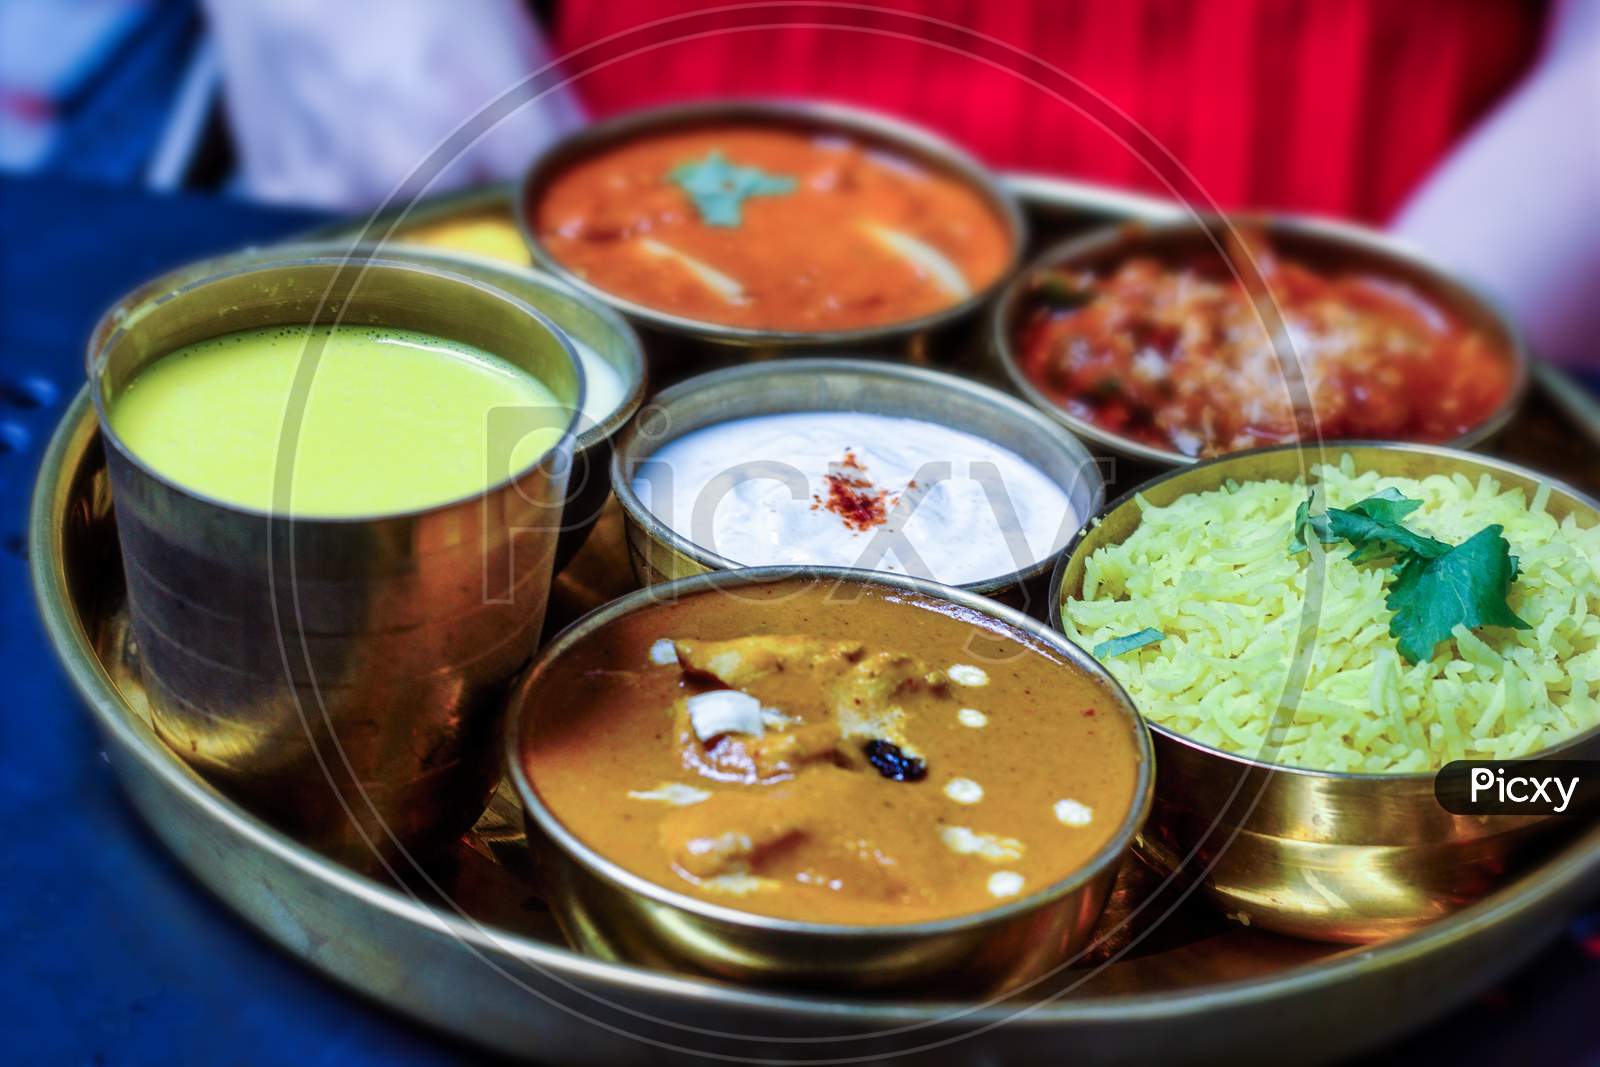 An Indian Thali Meaning Steel Plate Containing Different Food Items On A Round Platter Such As Basmati Rice, Curd Or Raita, Butter Chicken And Mango Lassi Etc I